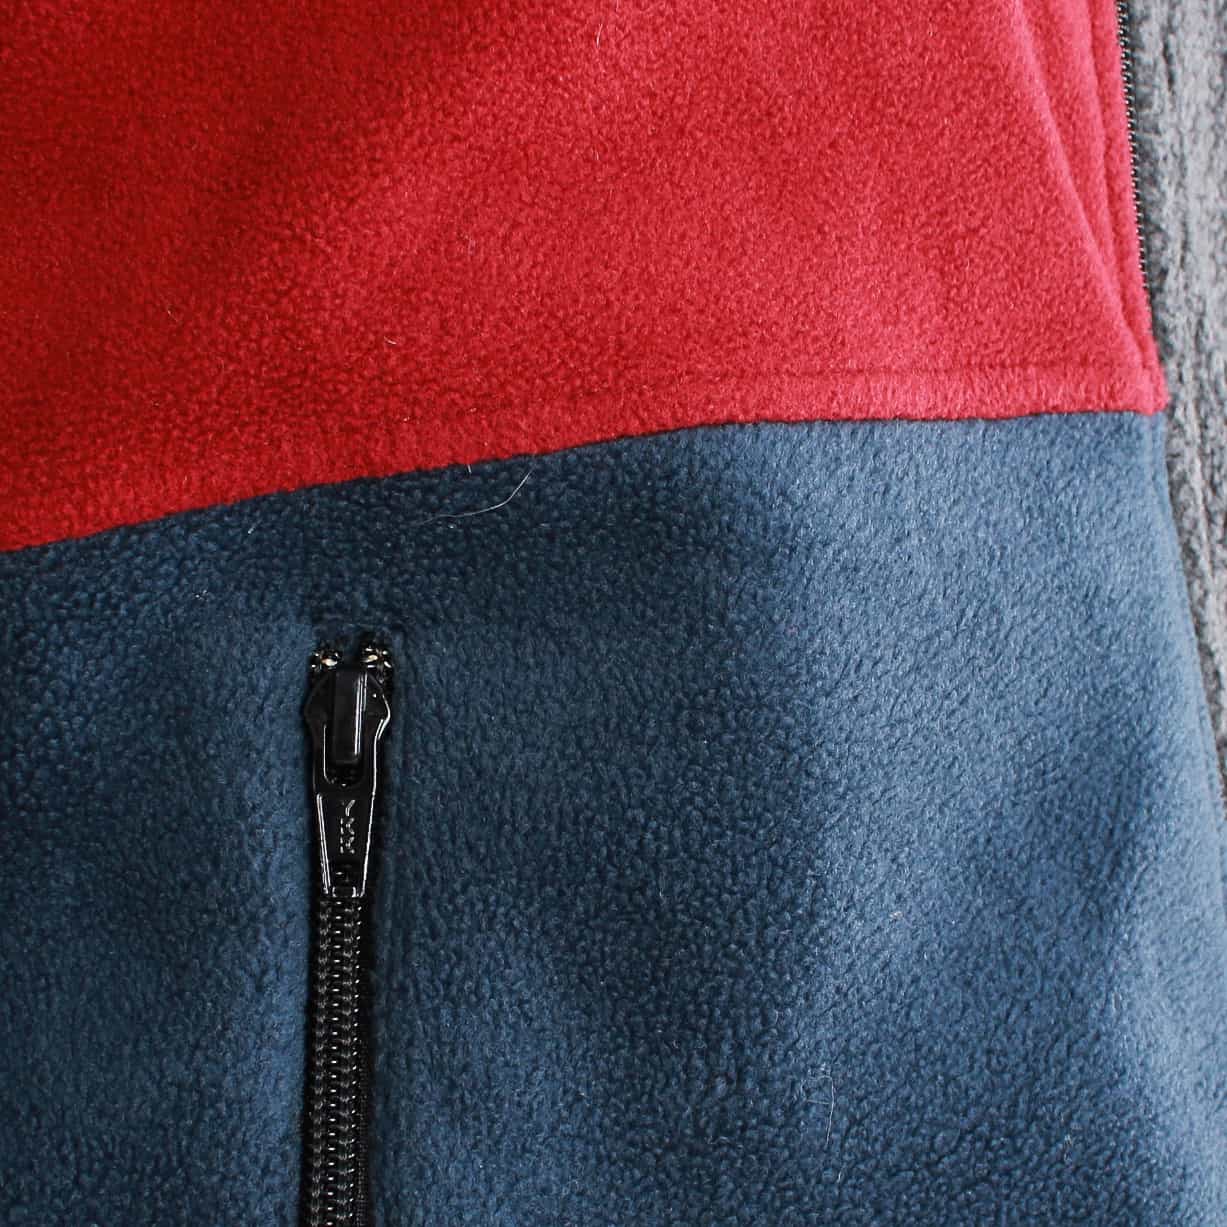 Re-Worked Patagonia Fleece #48 - American Madness